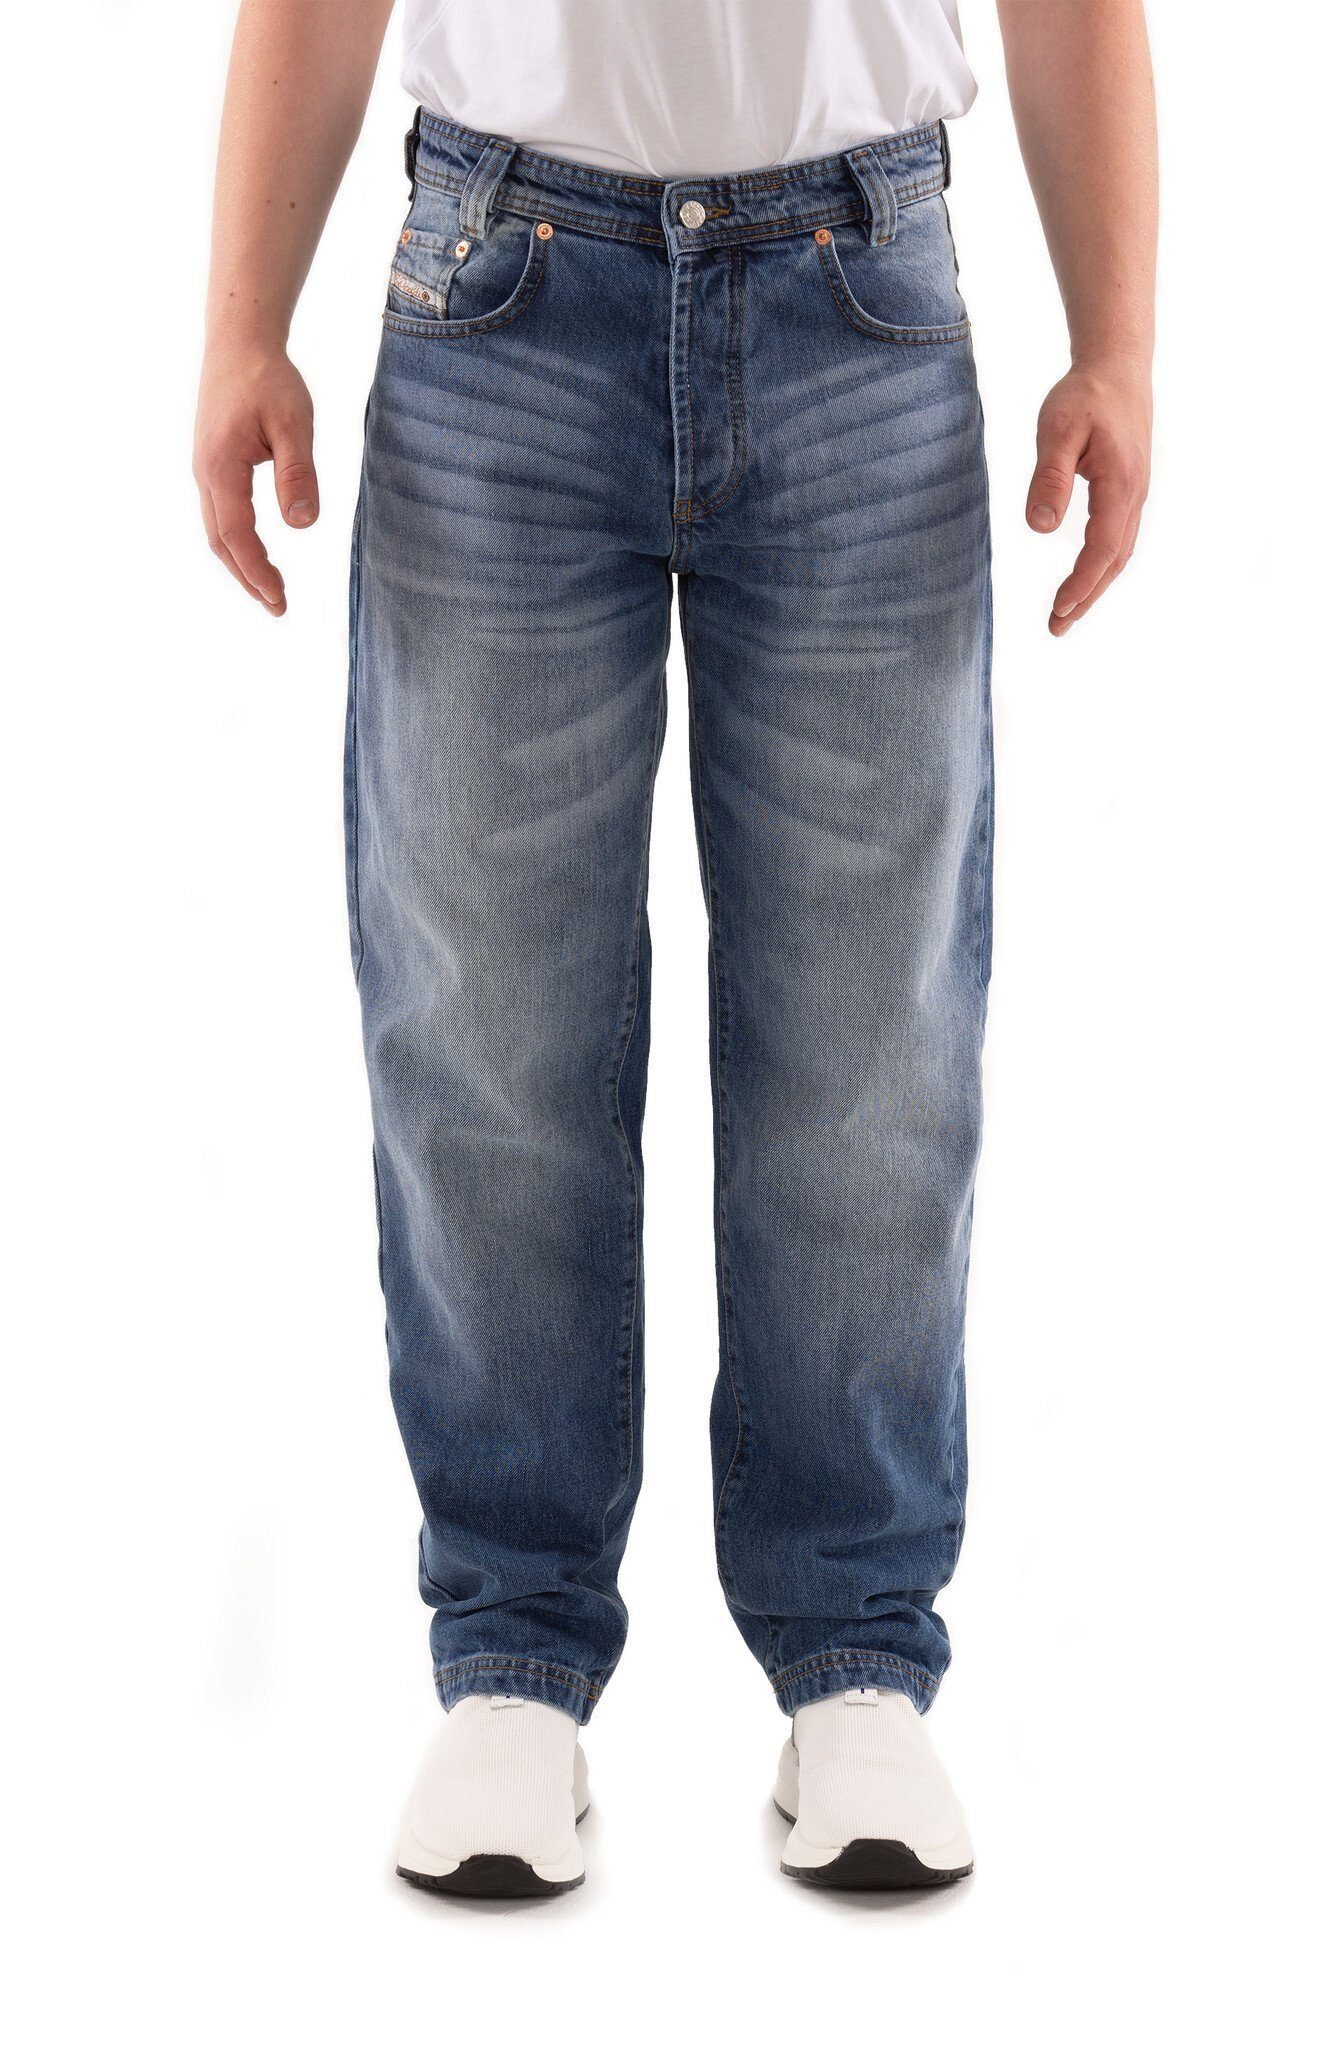 PICALDI Jeans Weite Jeans Zicco 472 Loose Fit, Relaxed Fit Montenegro